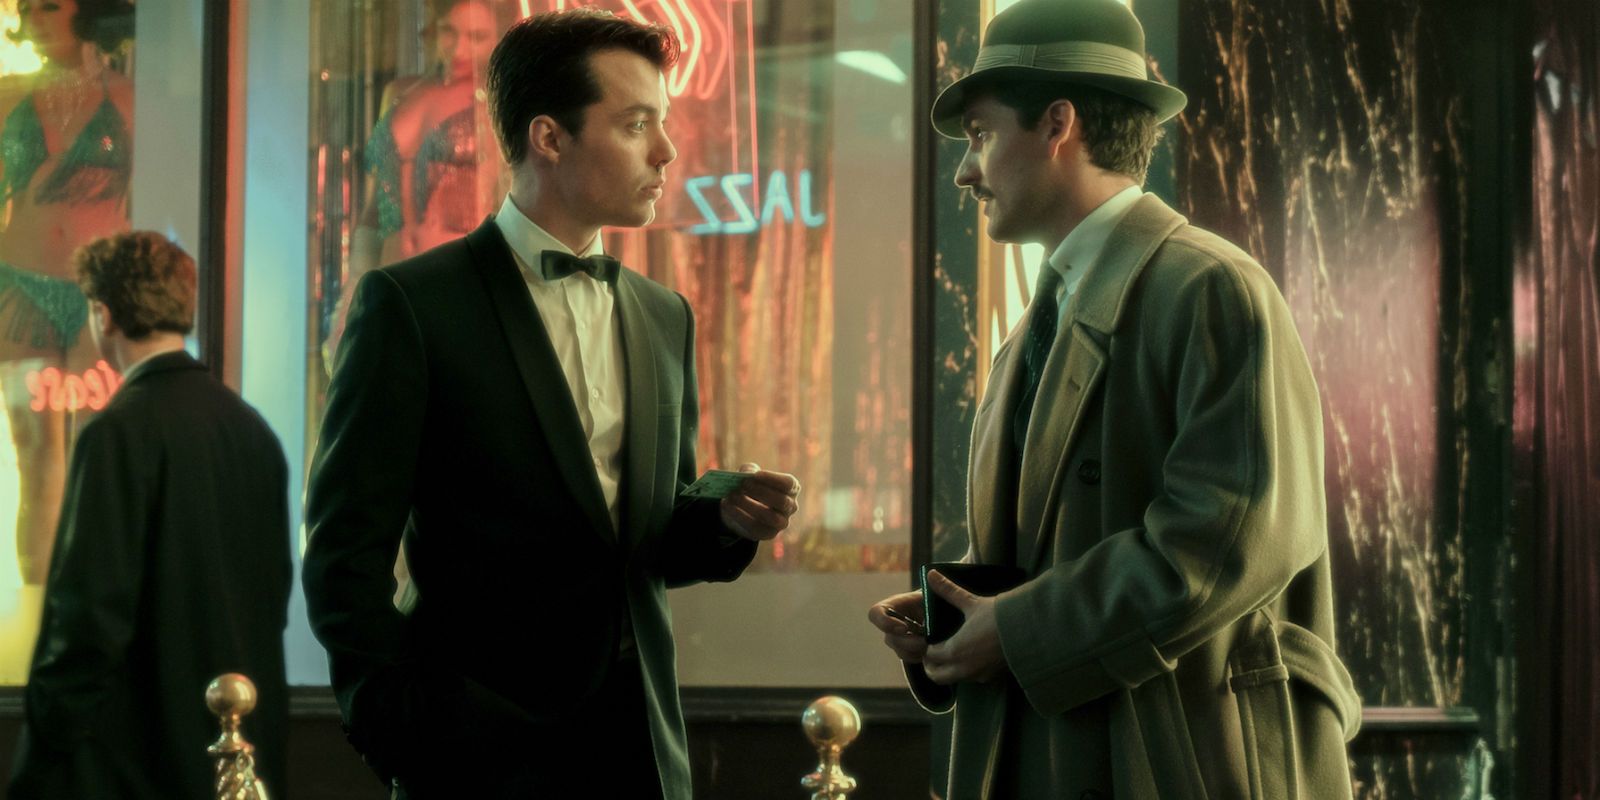 Pennyworth: 5 Perfect Fan Theories About Season 2 (& 5 Hilariously Bad Ones)